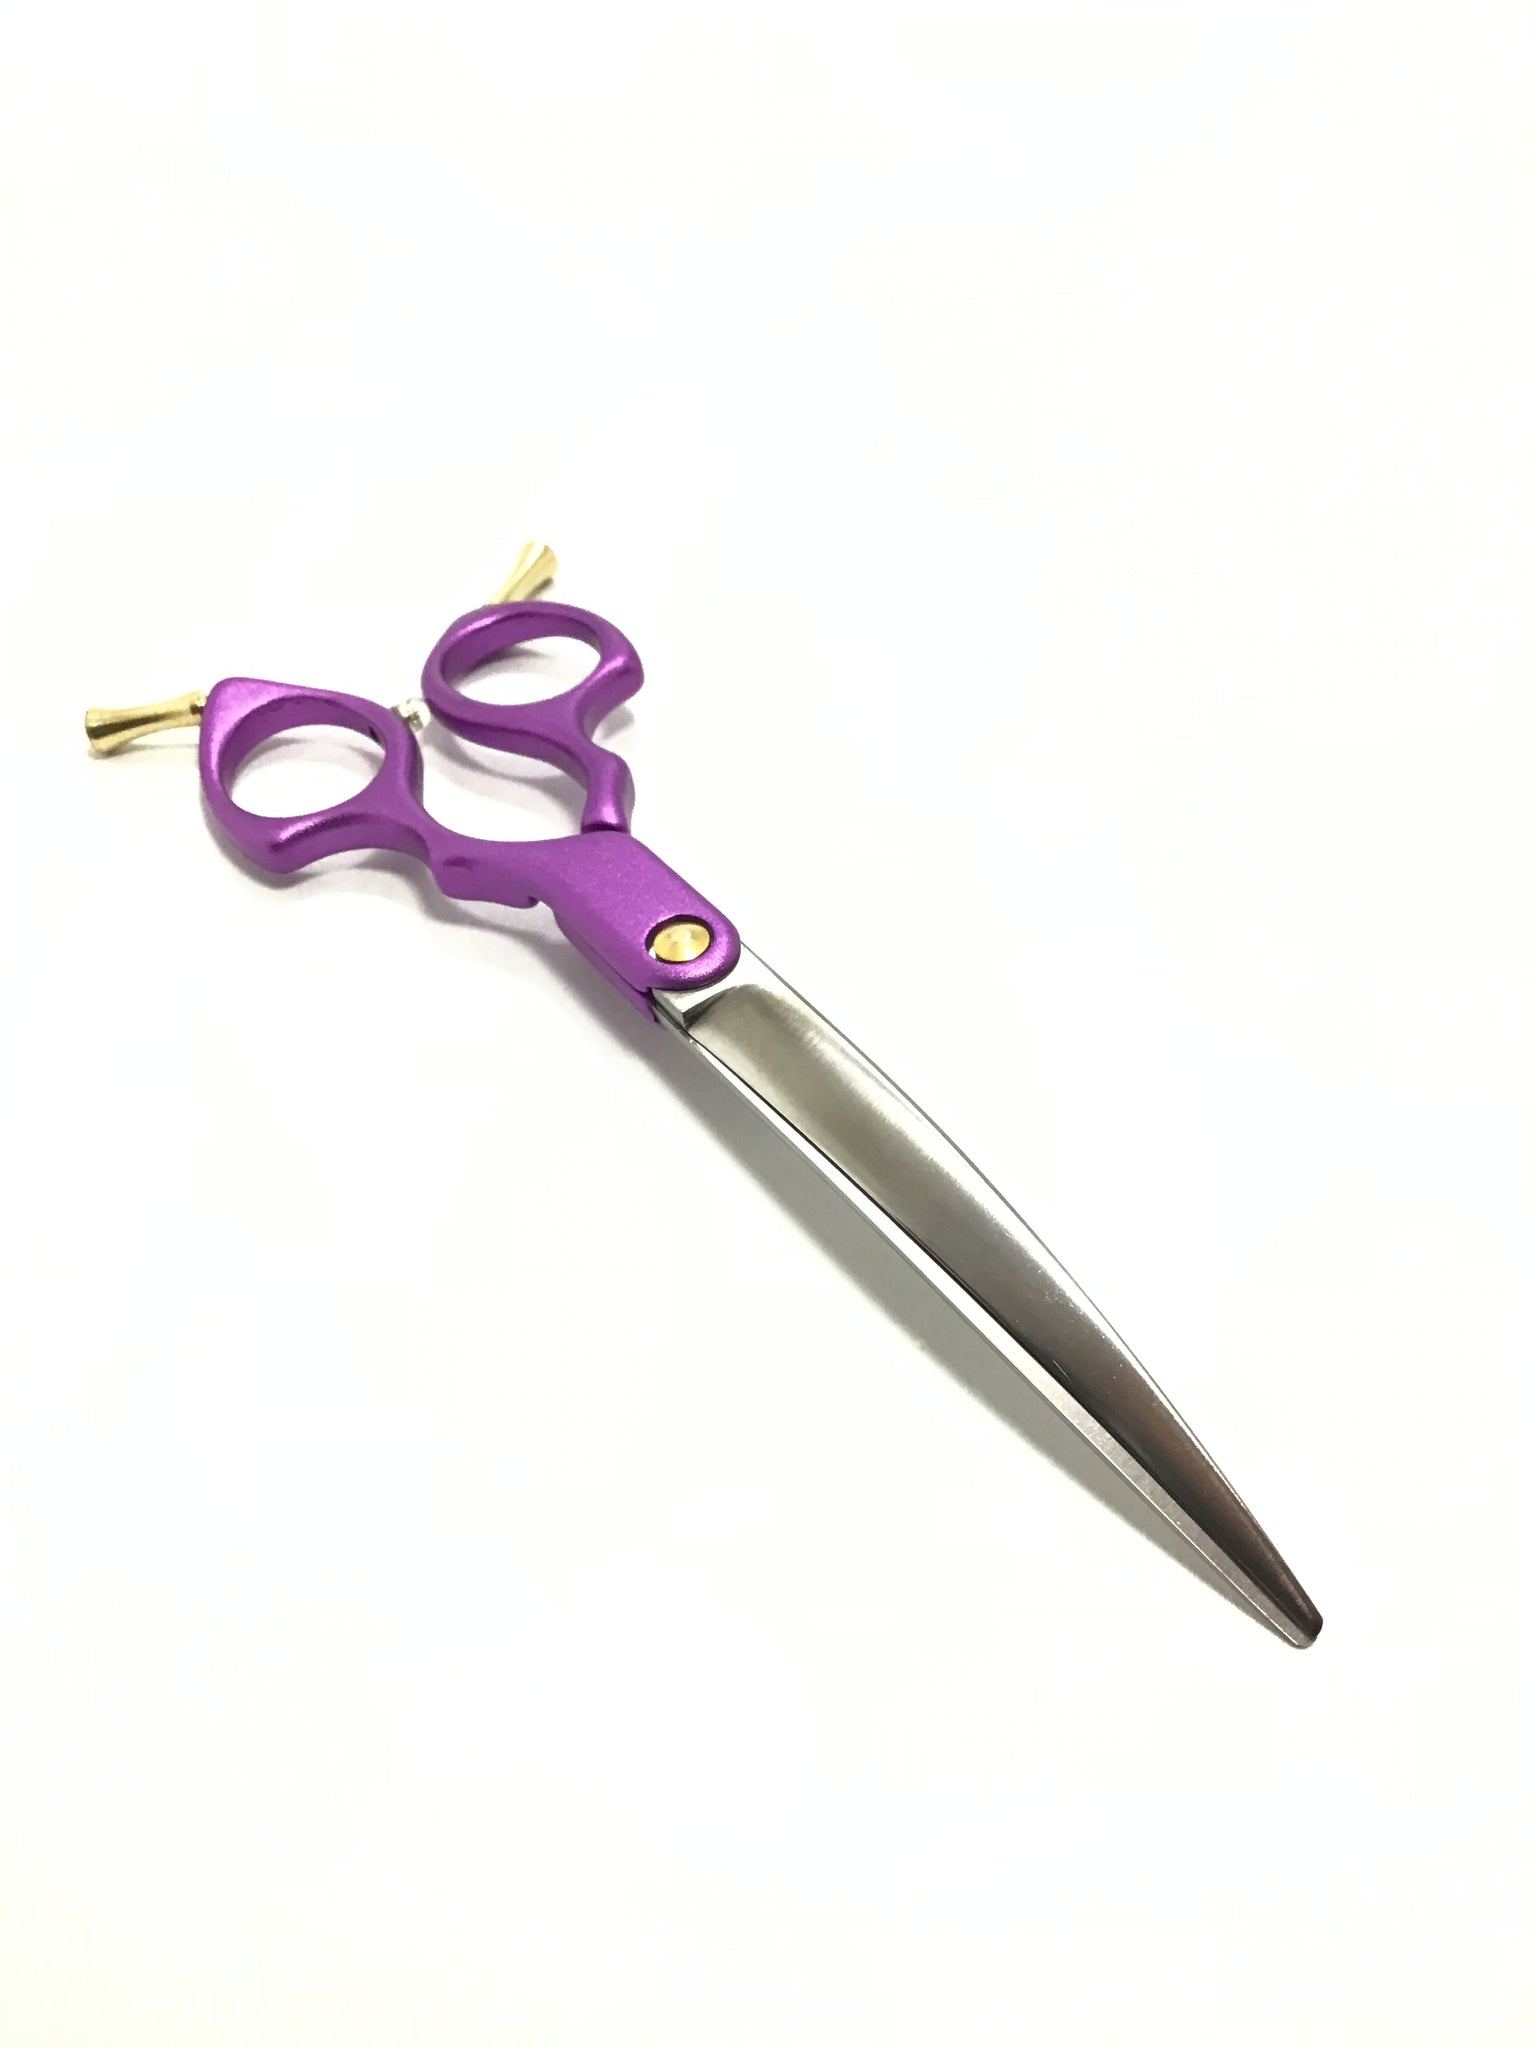 Global Scissors Reese 7 inch Asian Fusion Extreme Curved Scissor